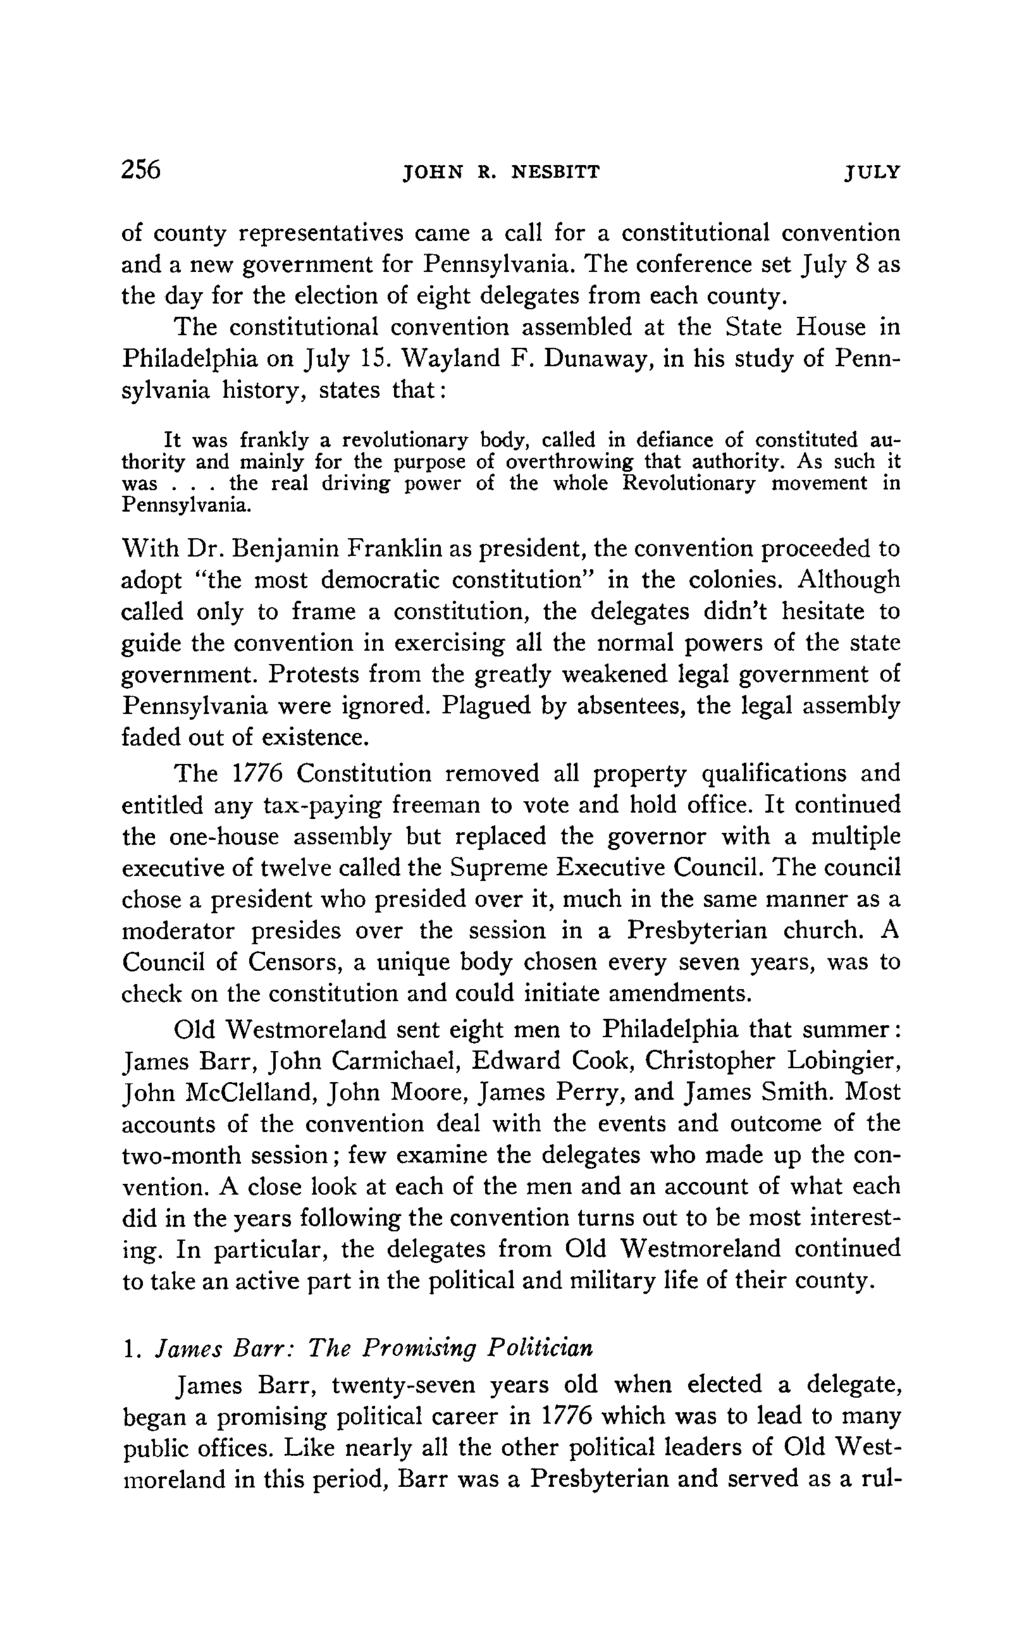 256 JOHN R. NESBITT JULY of county representatives came a call for a constitutional convention and a new government for Pennsylvania.